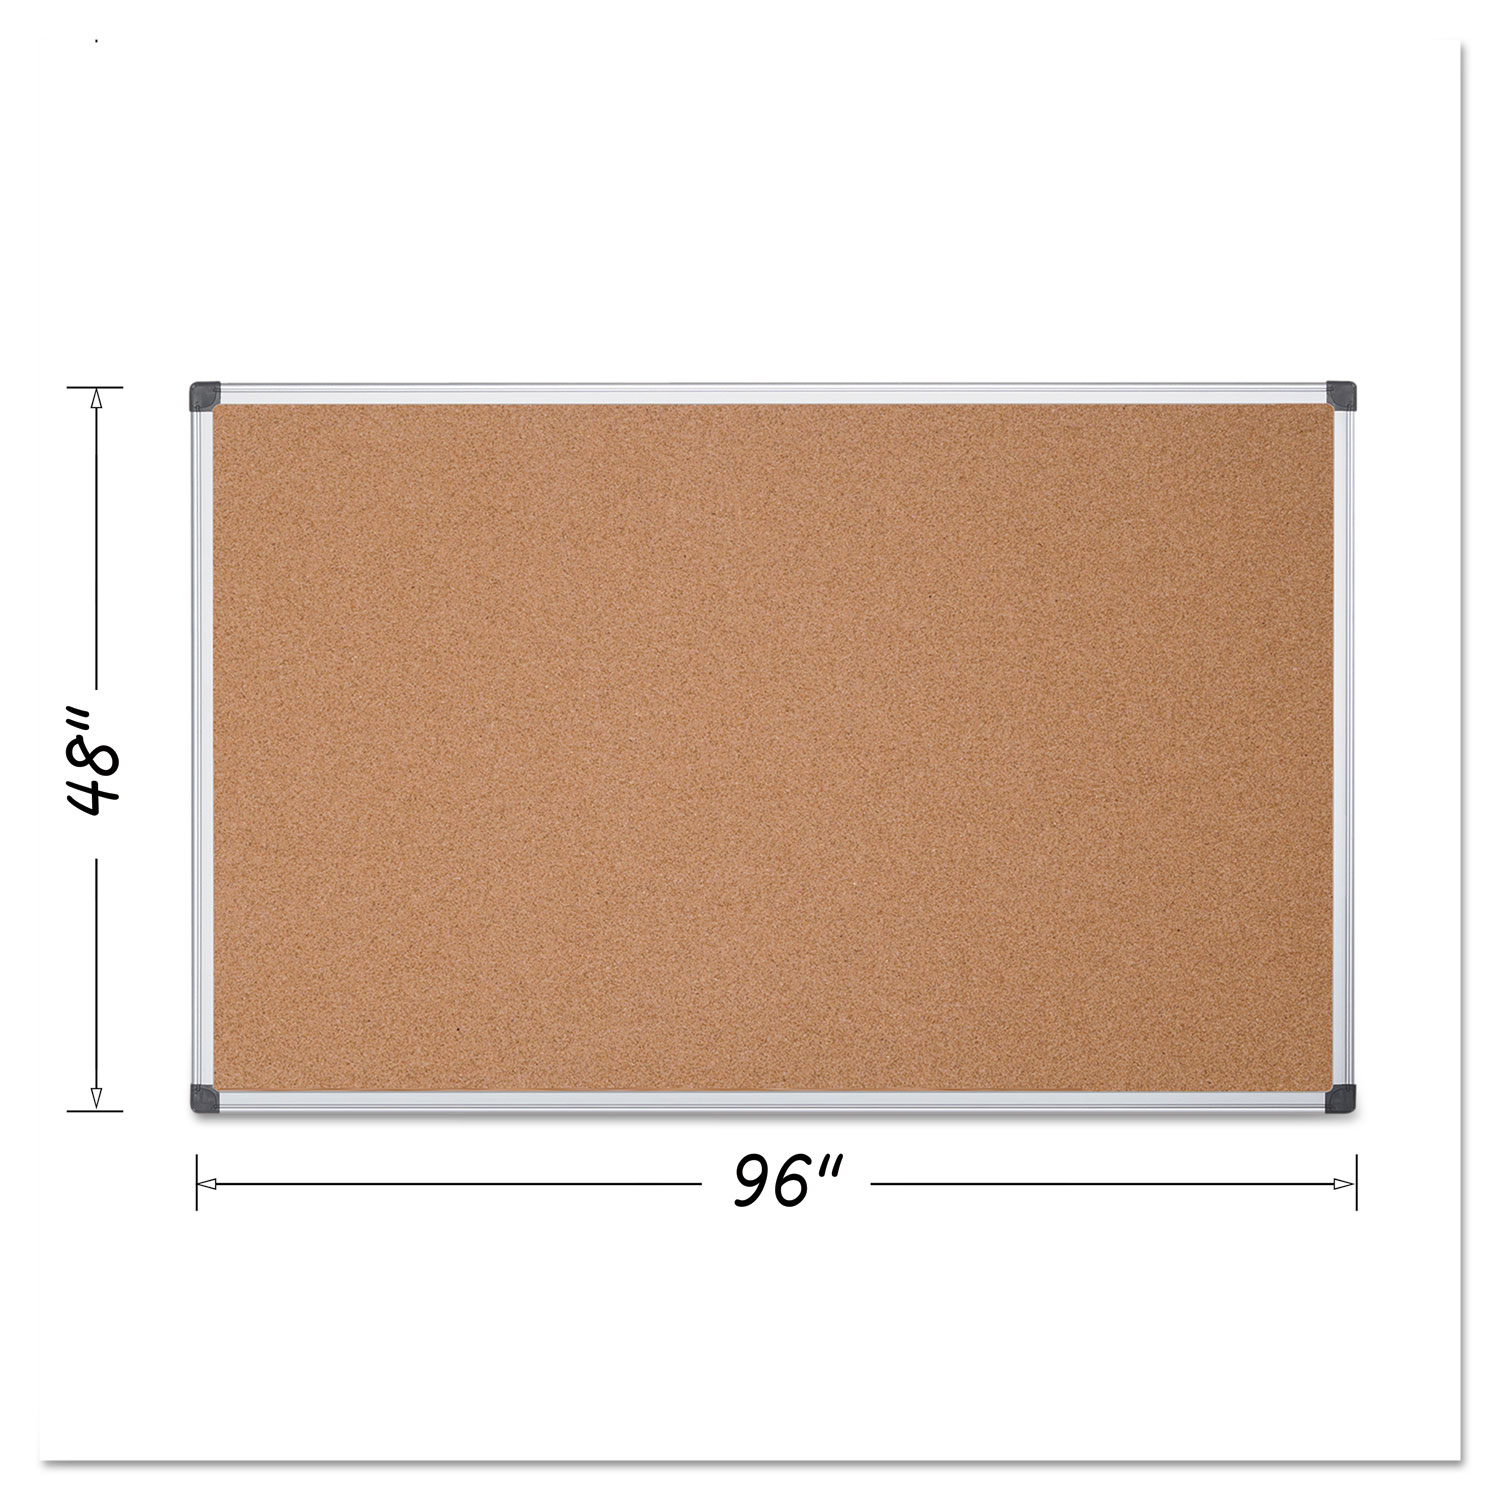  MasterVision CA211170 Value Cork Bulletin Board with Aluminum Frame, 48 x 96, Natural (BVCCA211170) 